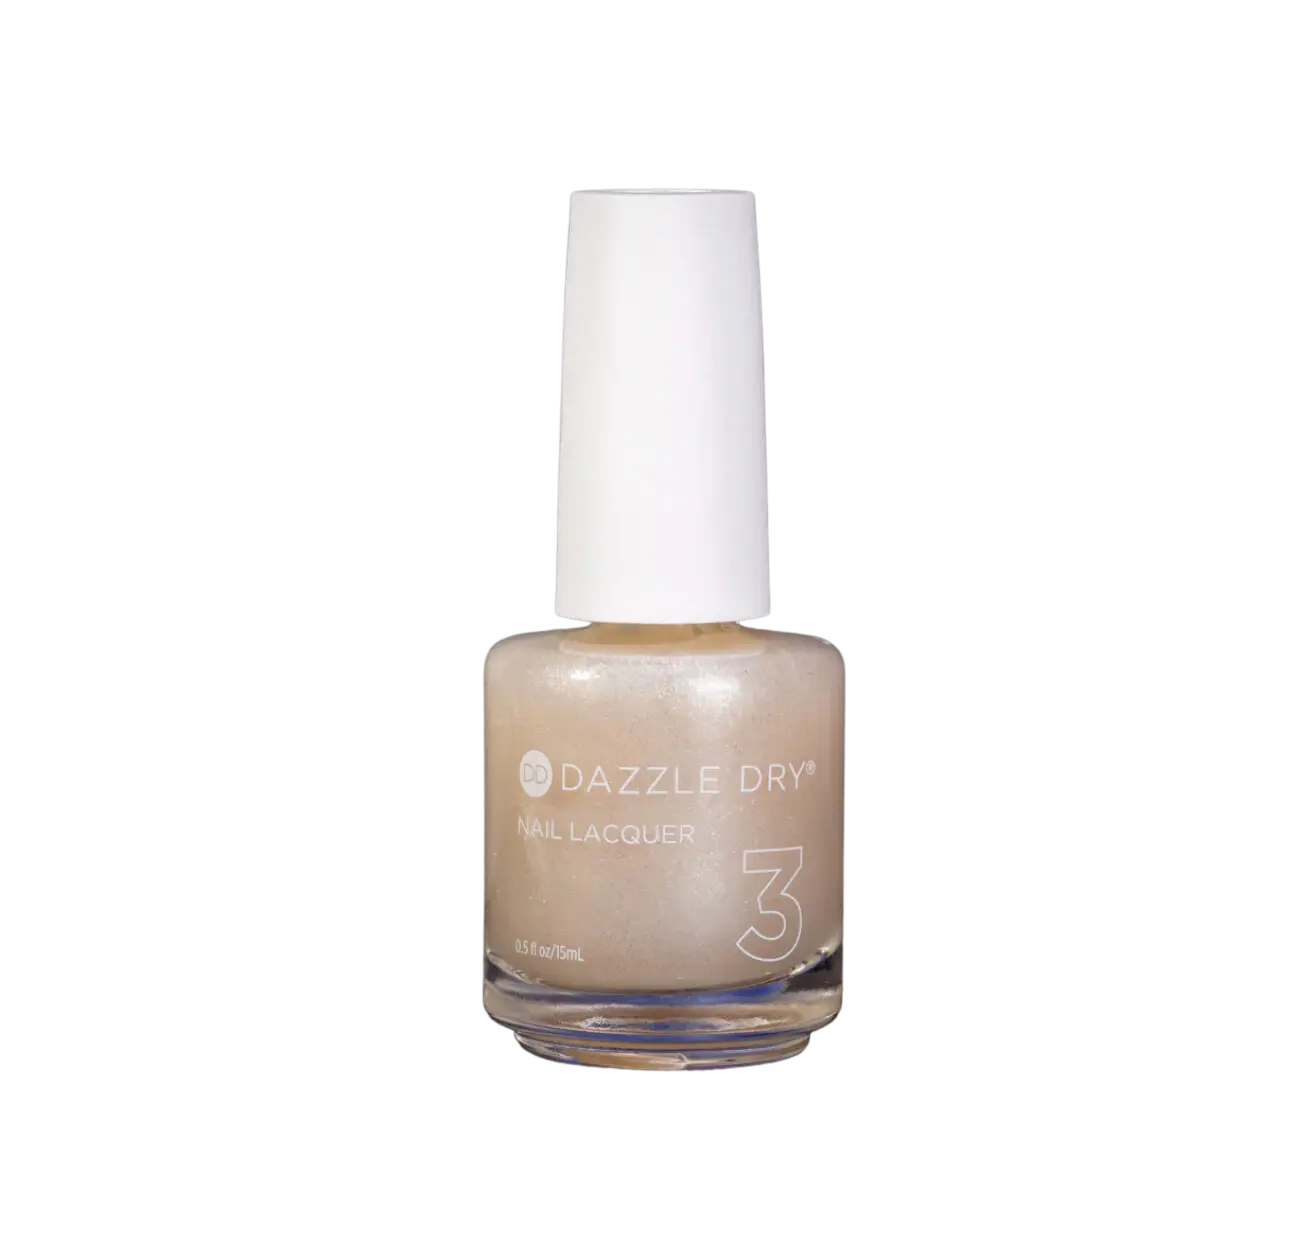 Dazzle Dry Stardust Nail Lacquer